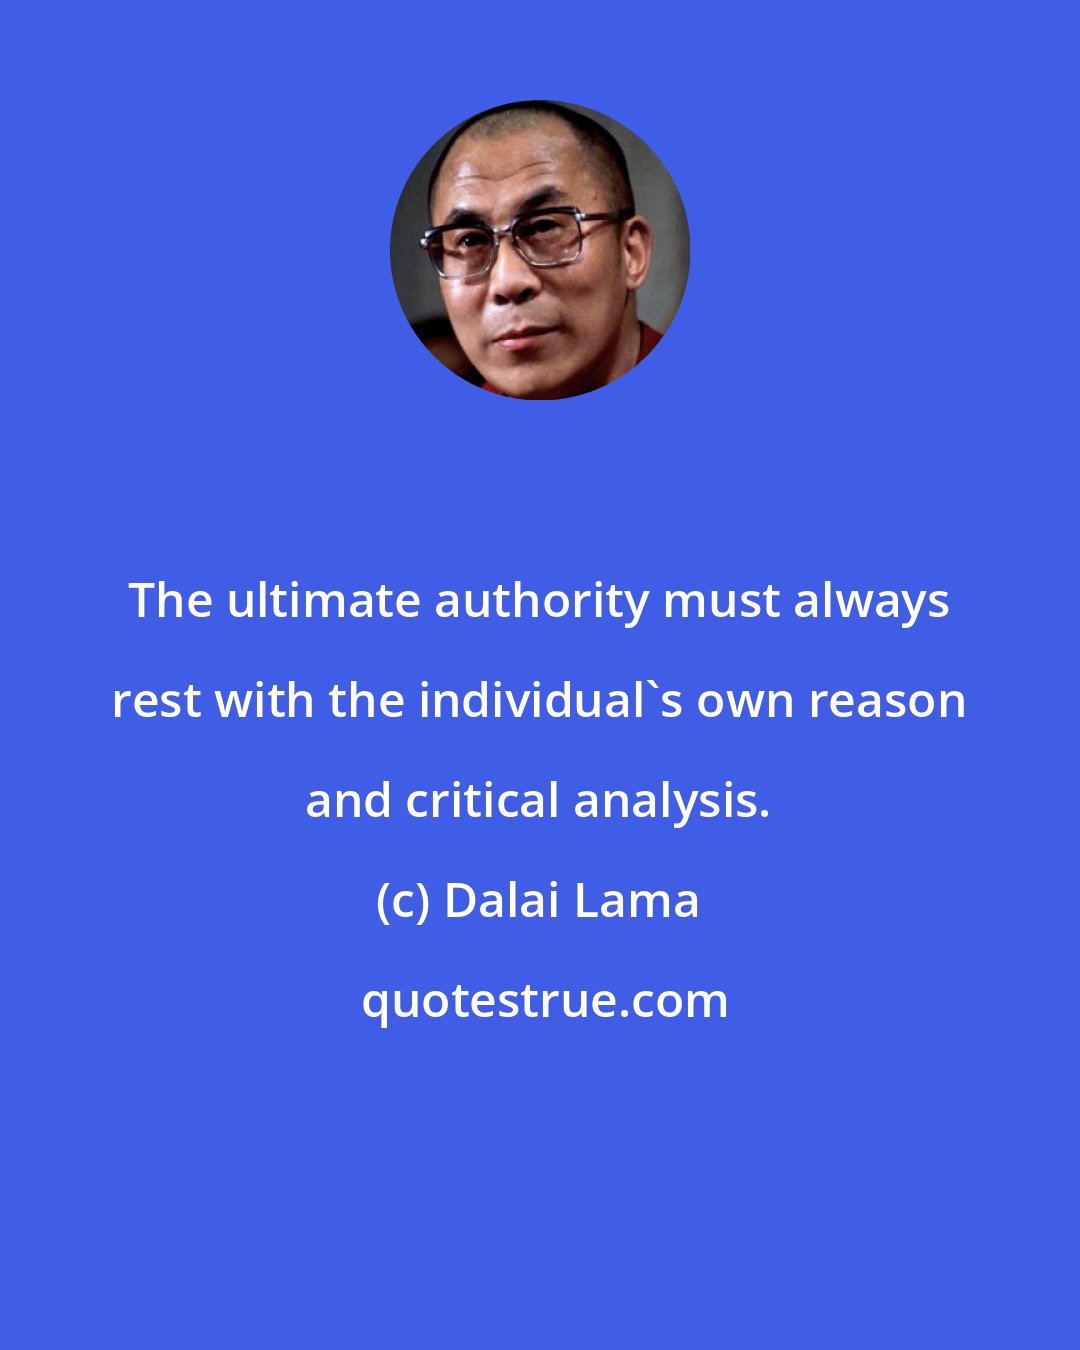 Dalai Lama: The ultimate authority must always rest with the individual's own reason and critical analysis.